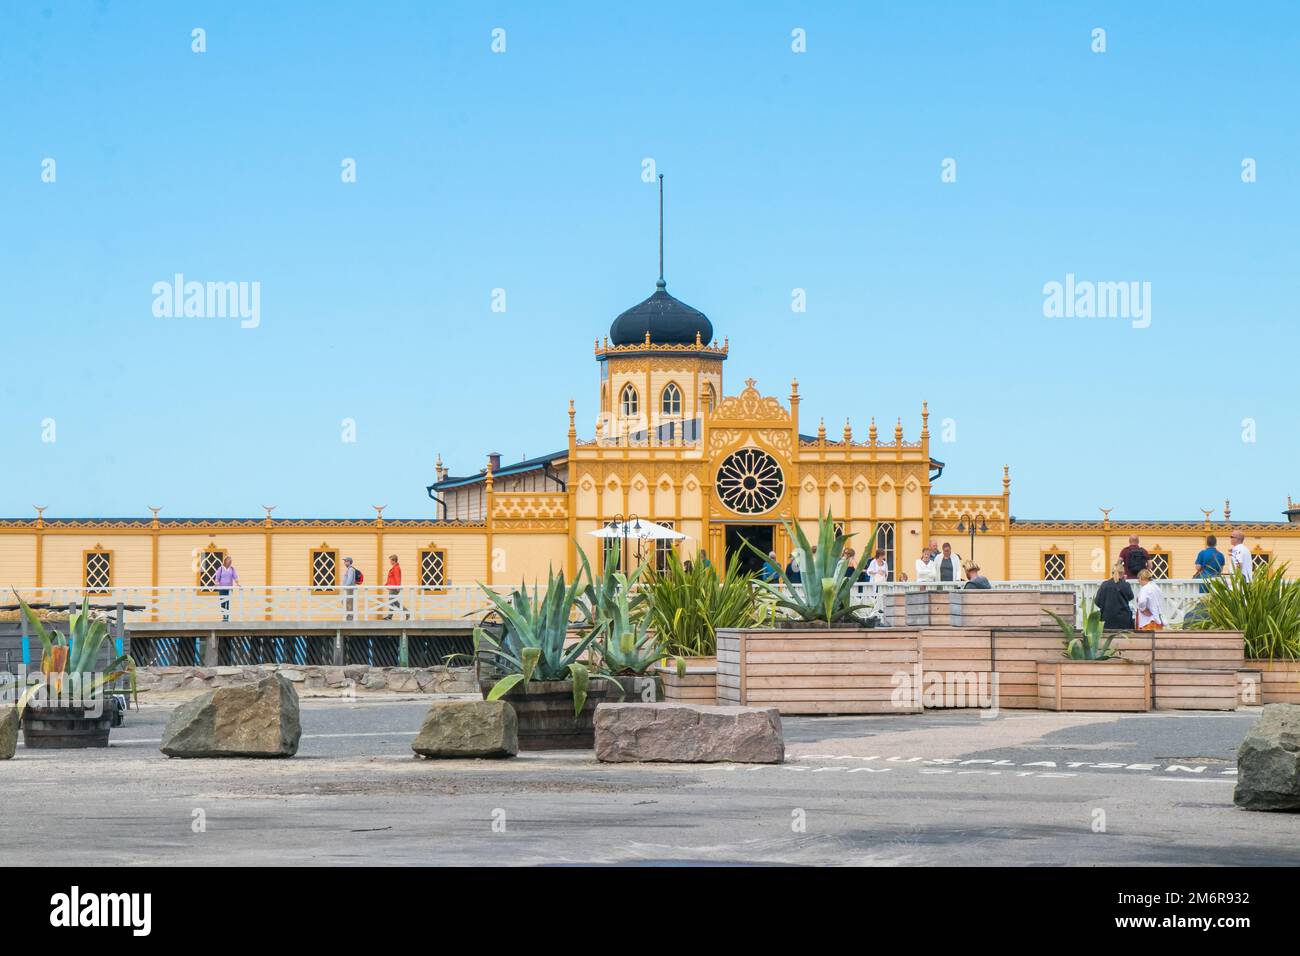 Beautiful city of Varberg and Falkenberg with its sea coastline in Sweden, Europe Stock Photo